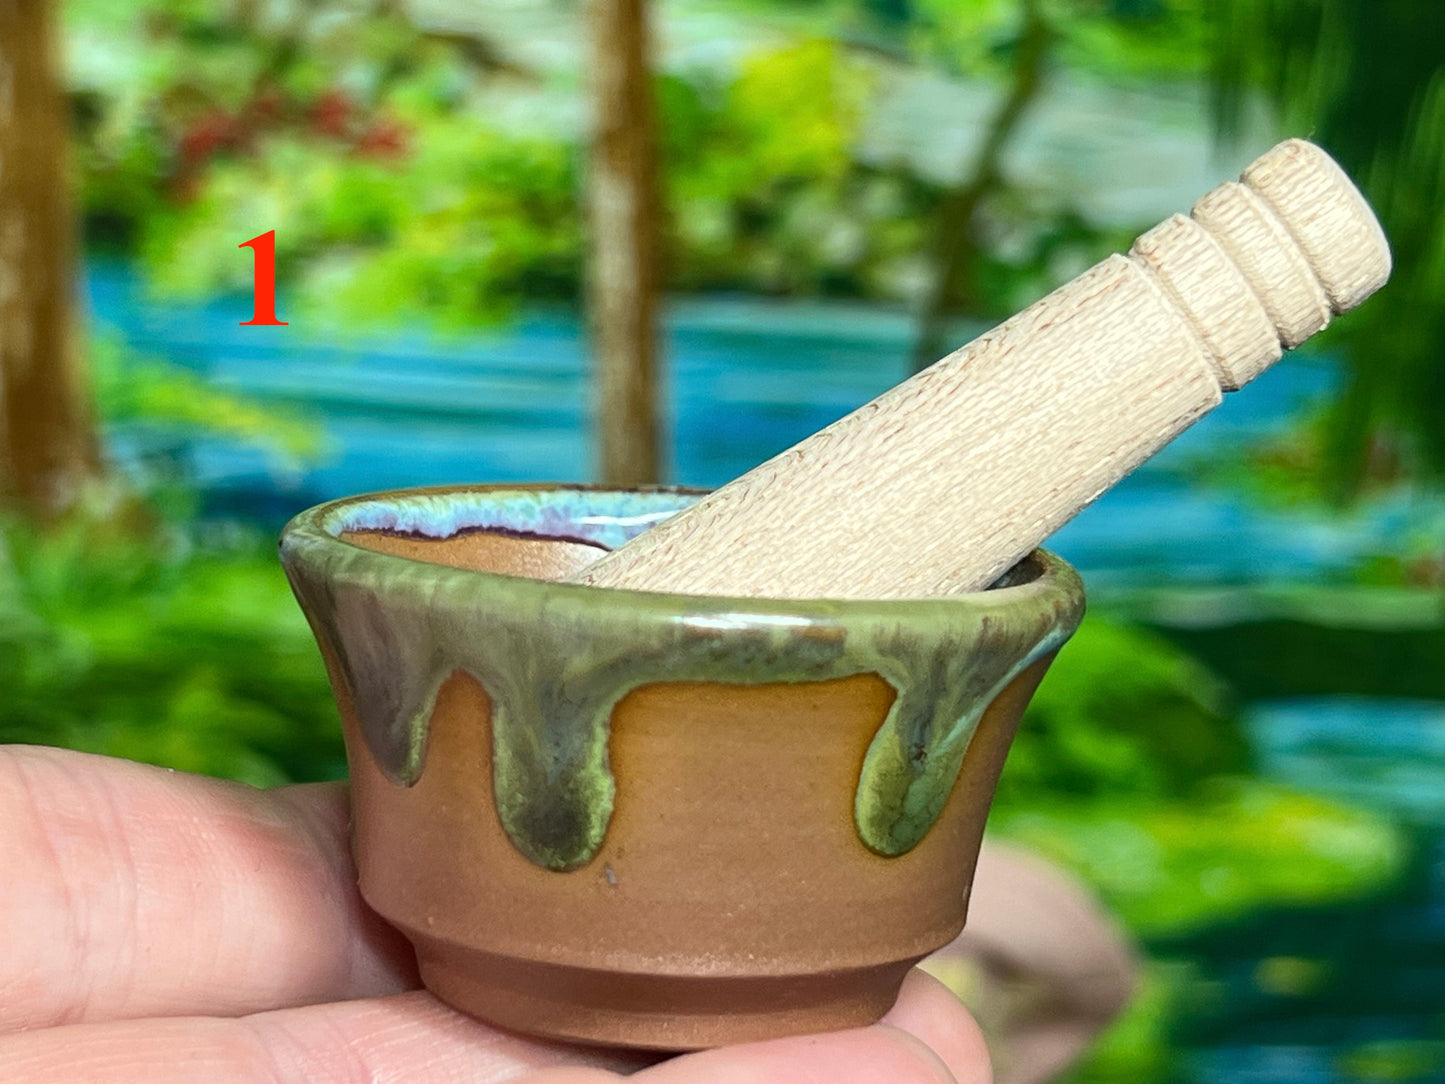 Small Mortar and Pestle